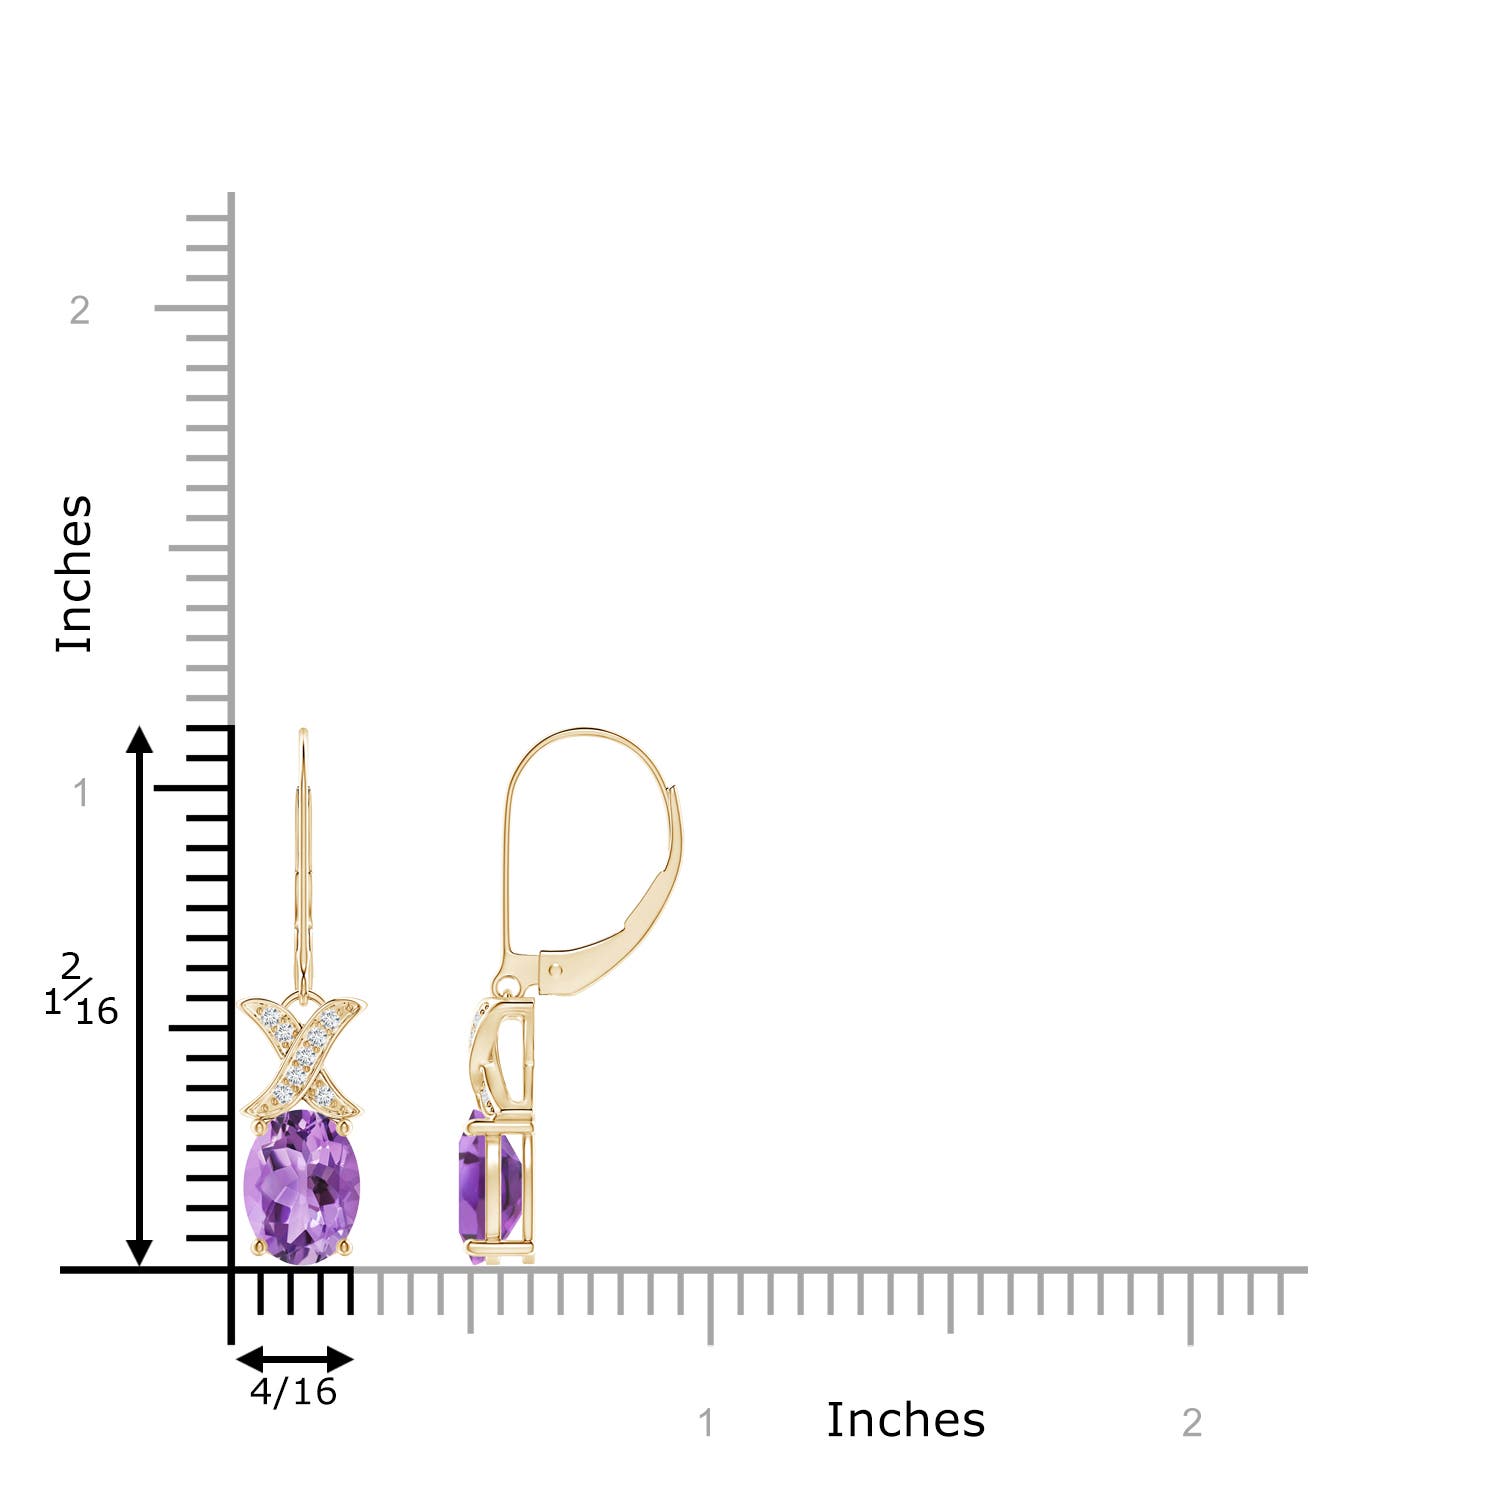 A - Amethyst / 2.38 CT / 14 KT Yellow Gold